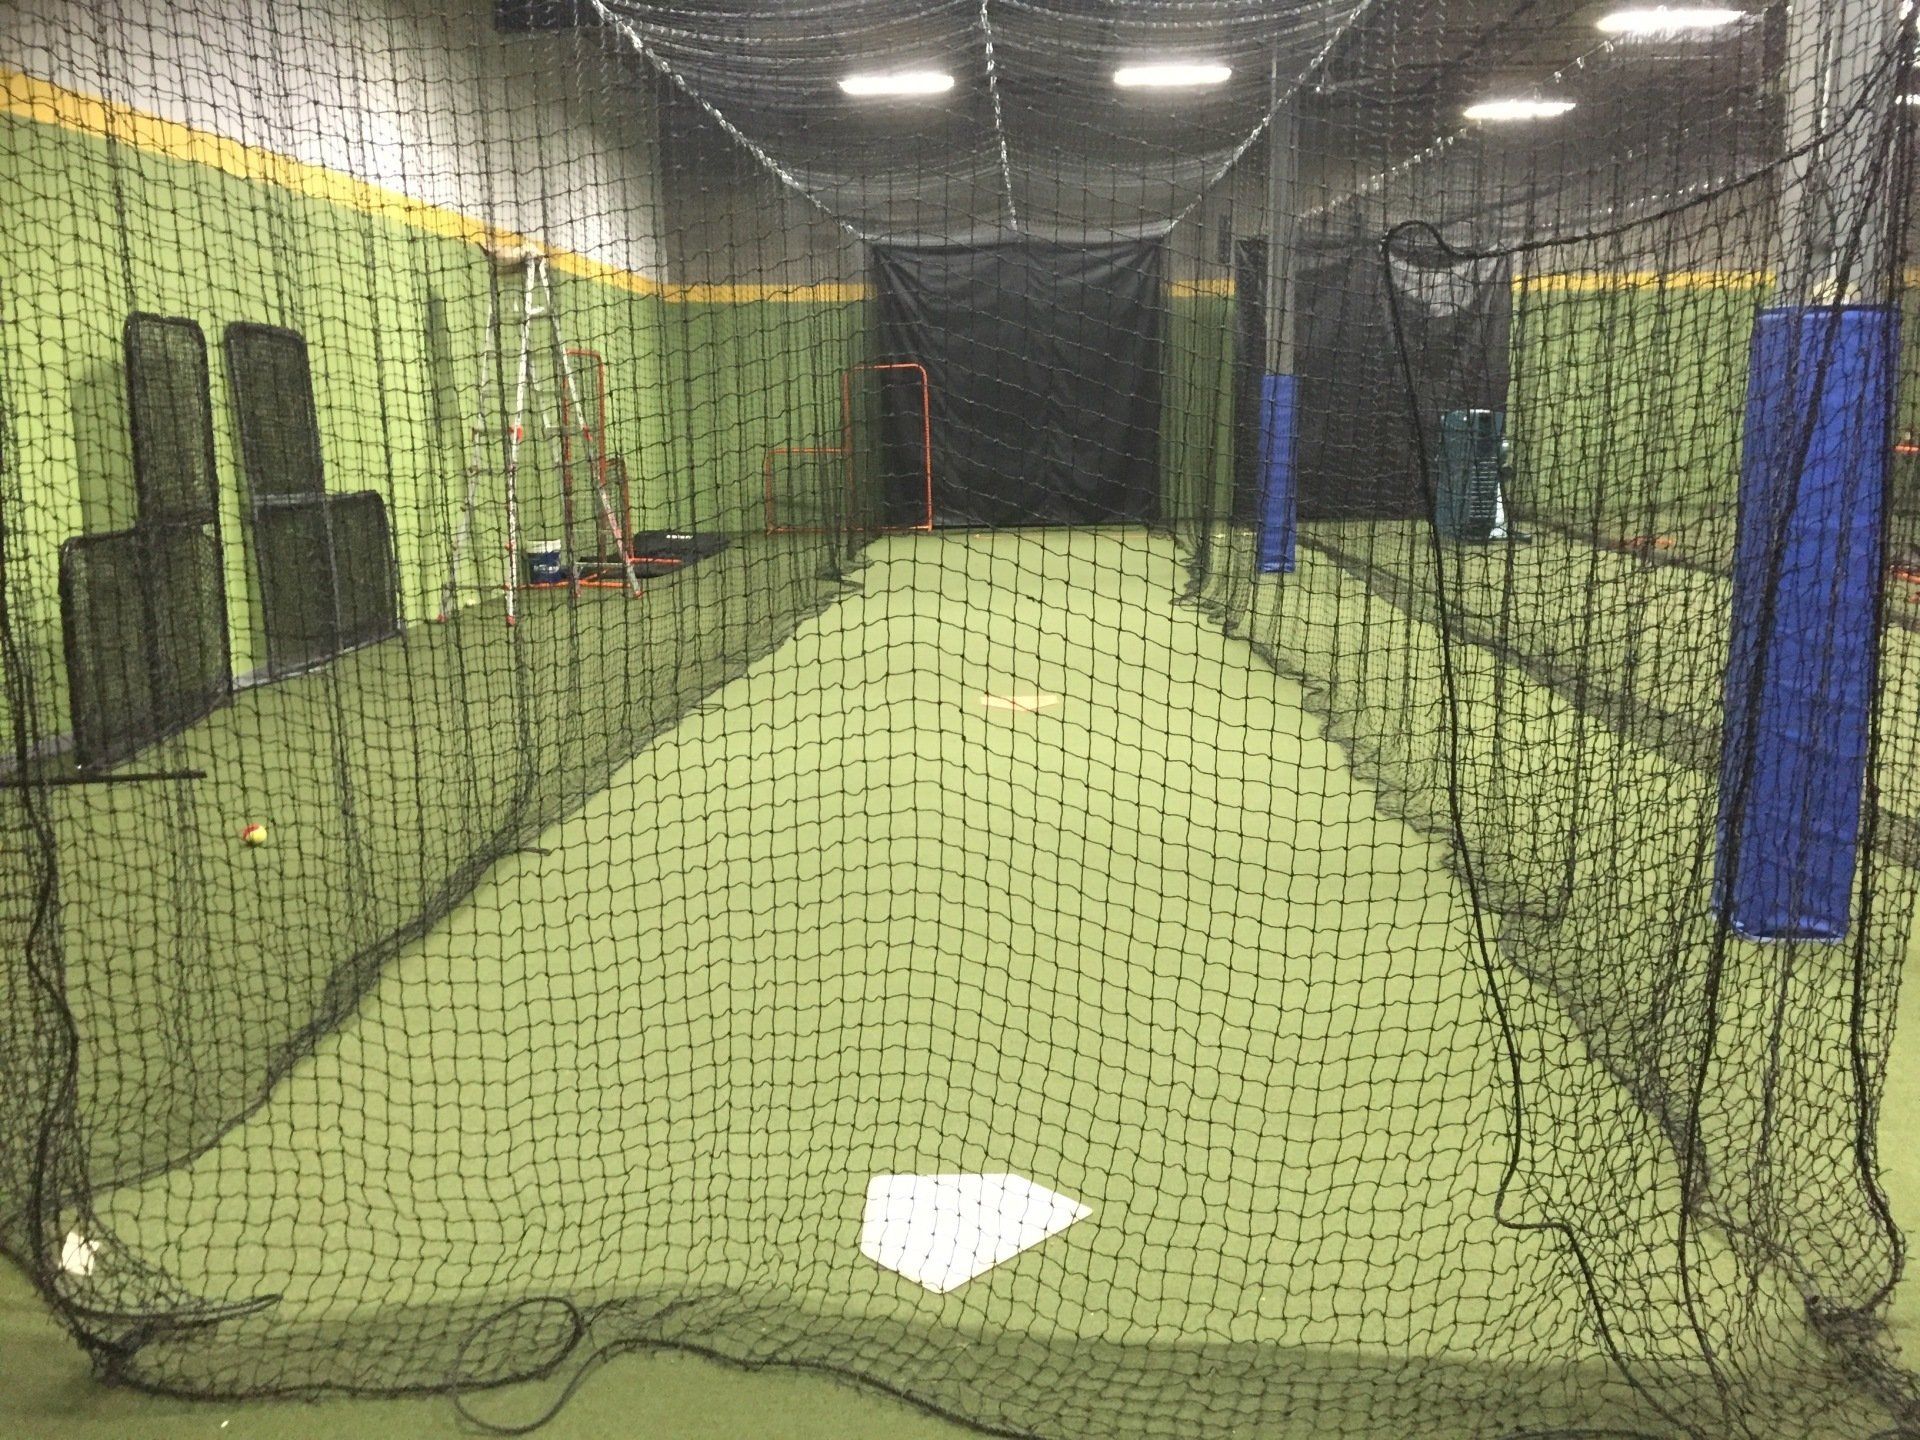 A baseball cage with a base in the middle of it.